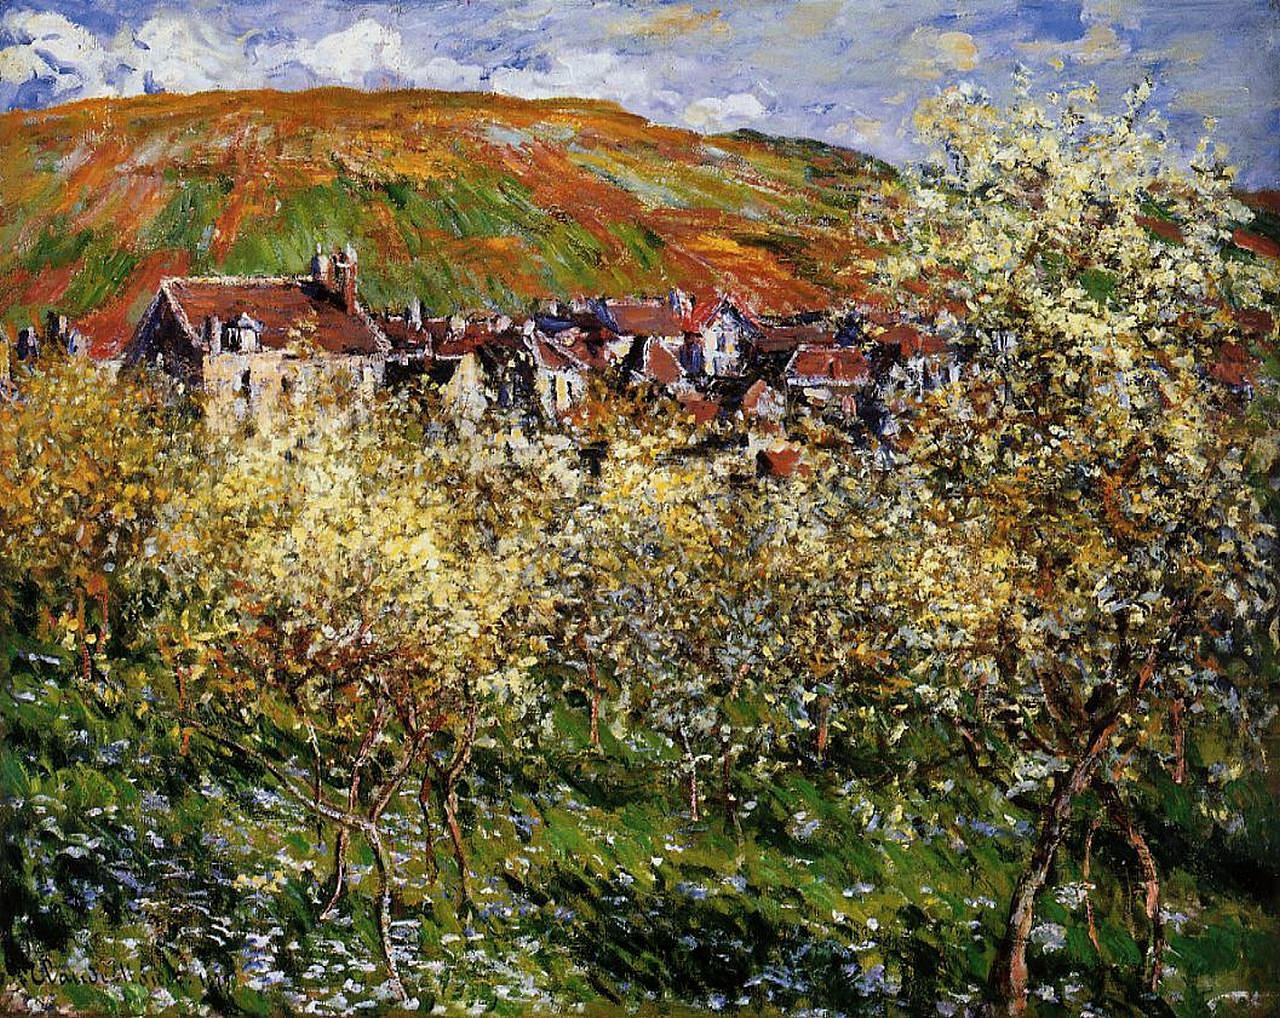 Plum Trees in Blossom at Vetheuil, 1879 - Claude Monet - WikiArt.org